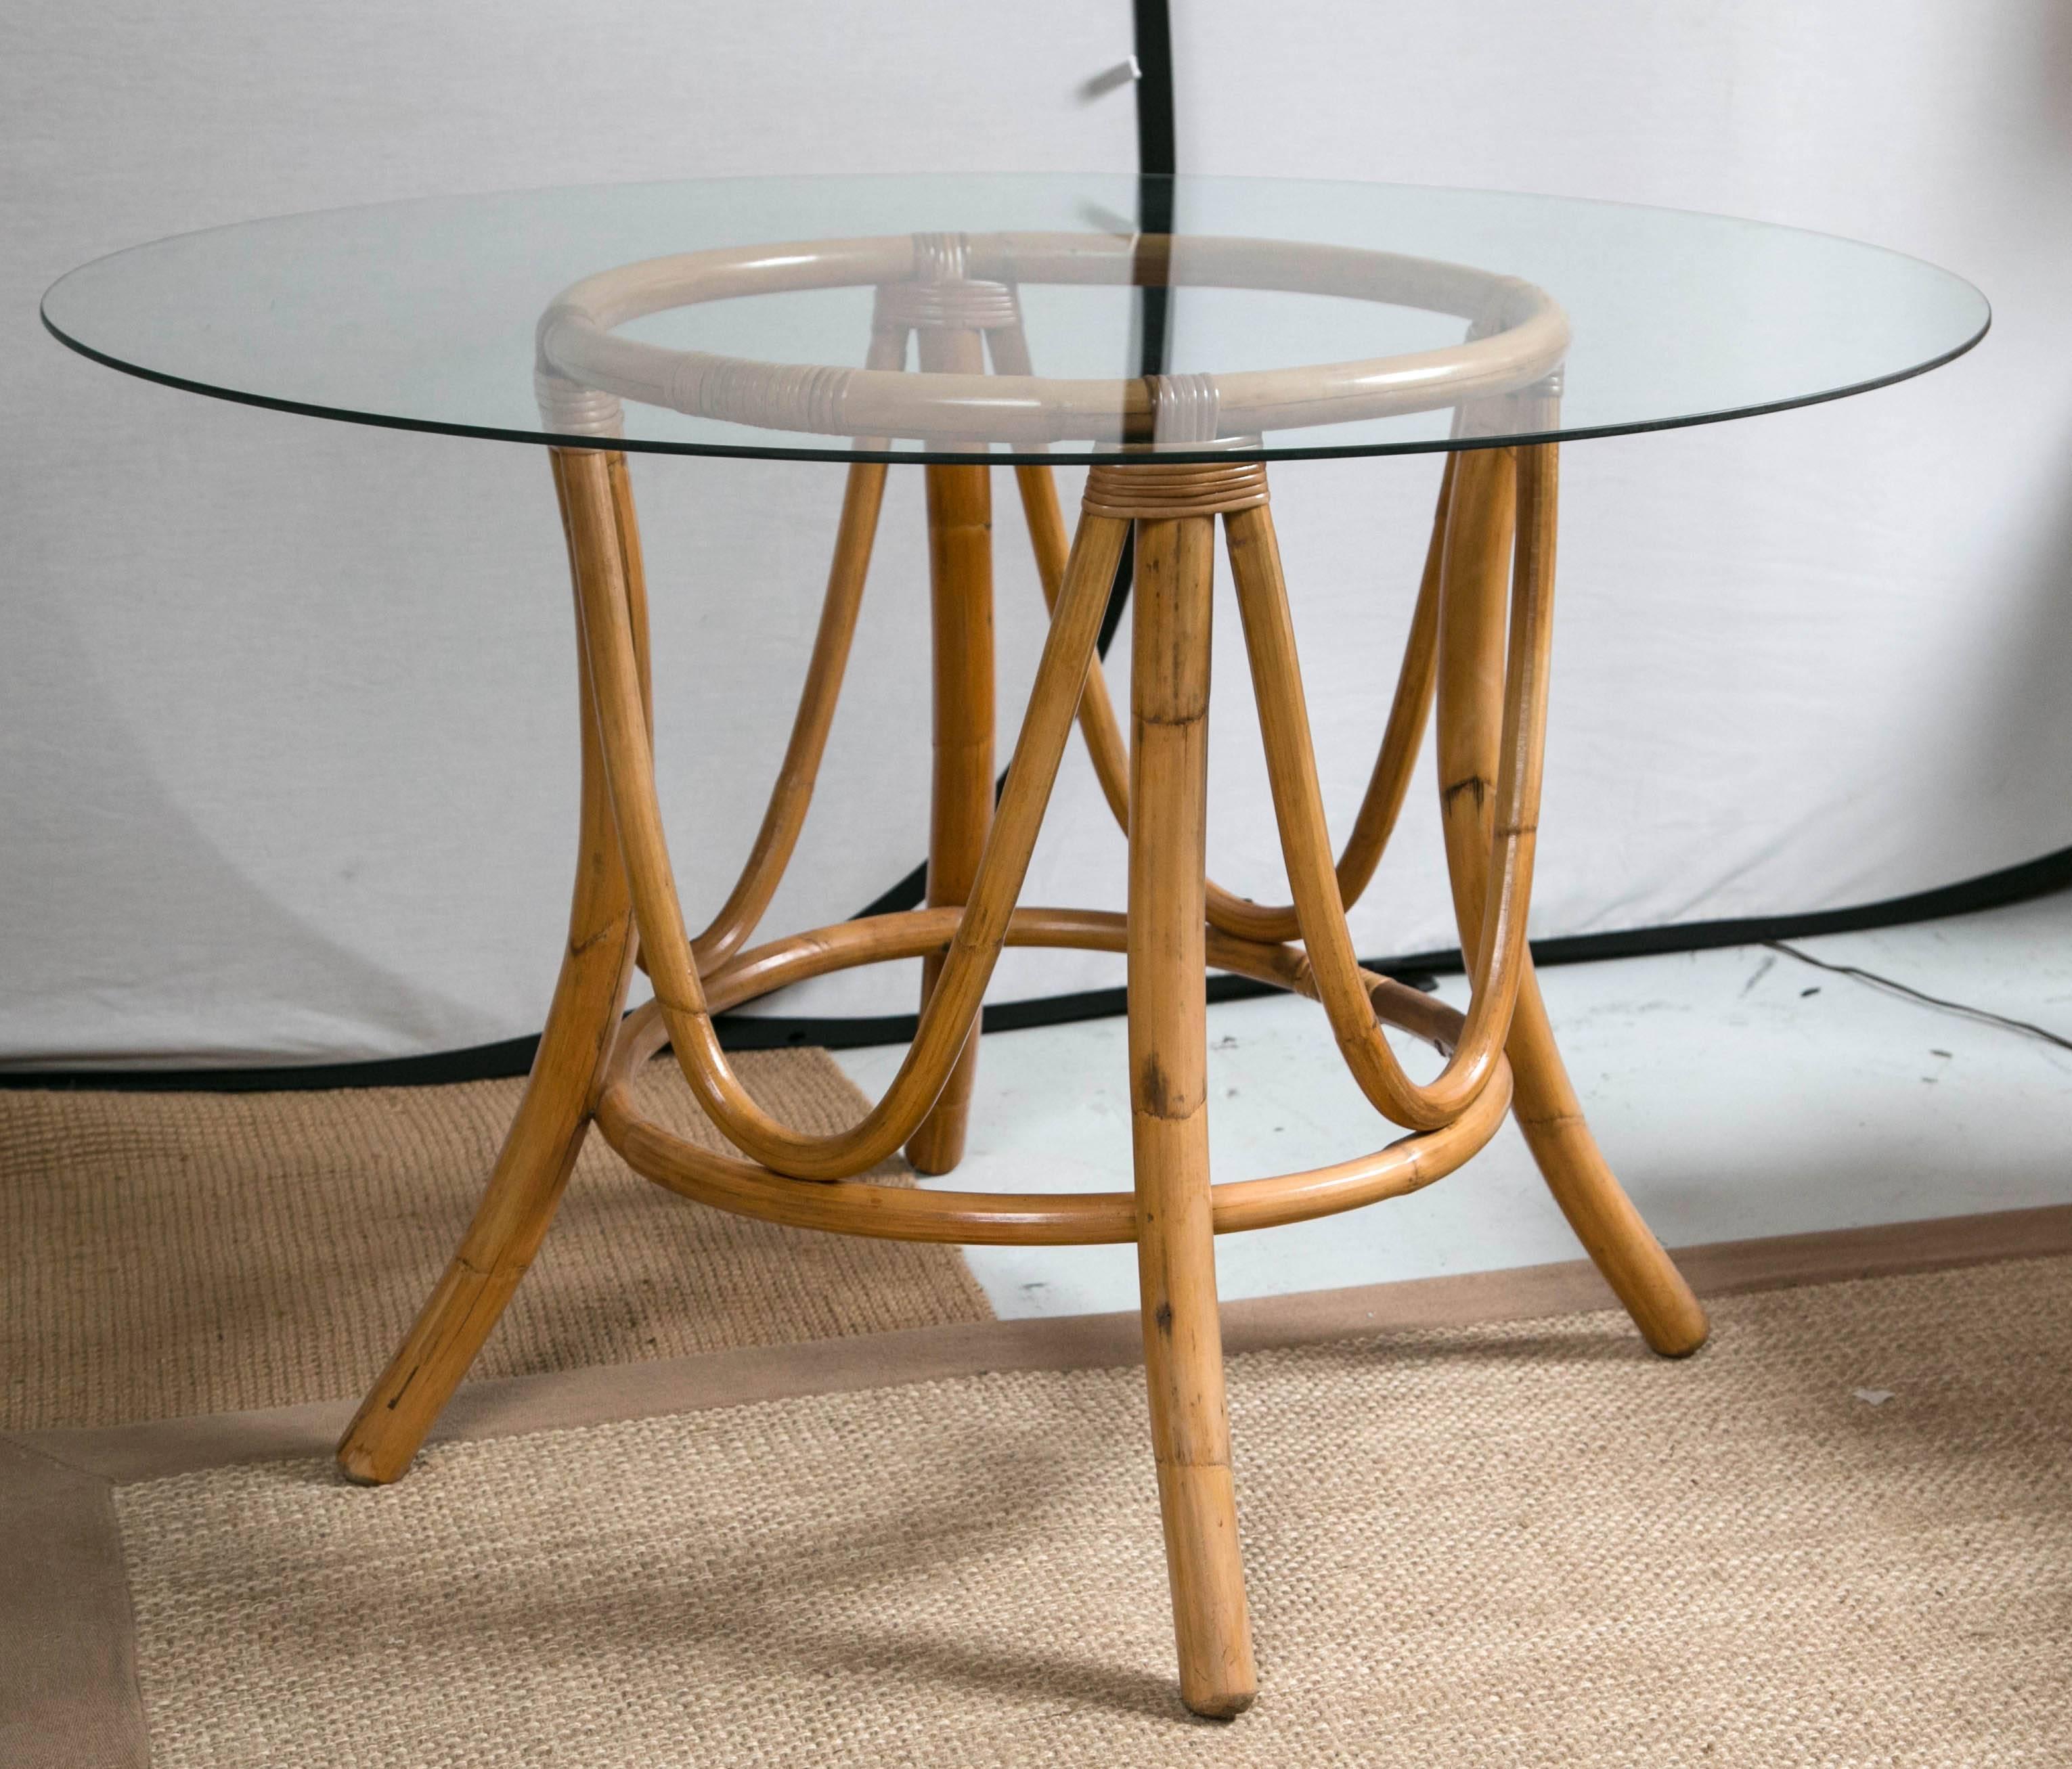 Glass-topped Rattan dining table with four swivel base chairs, original seat cushions and backs (removable) Round glass top is 44